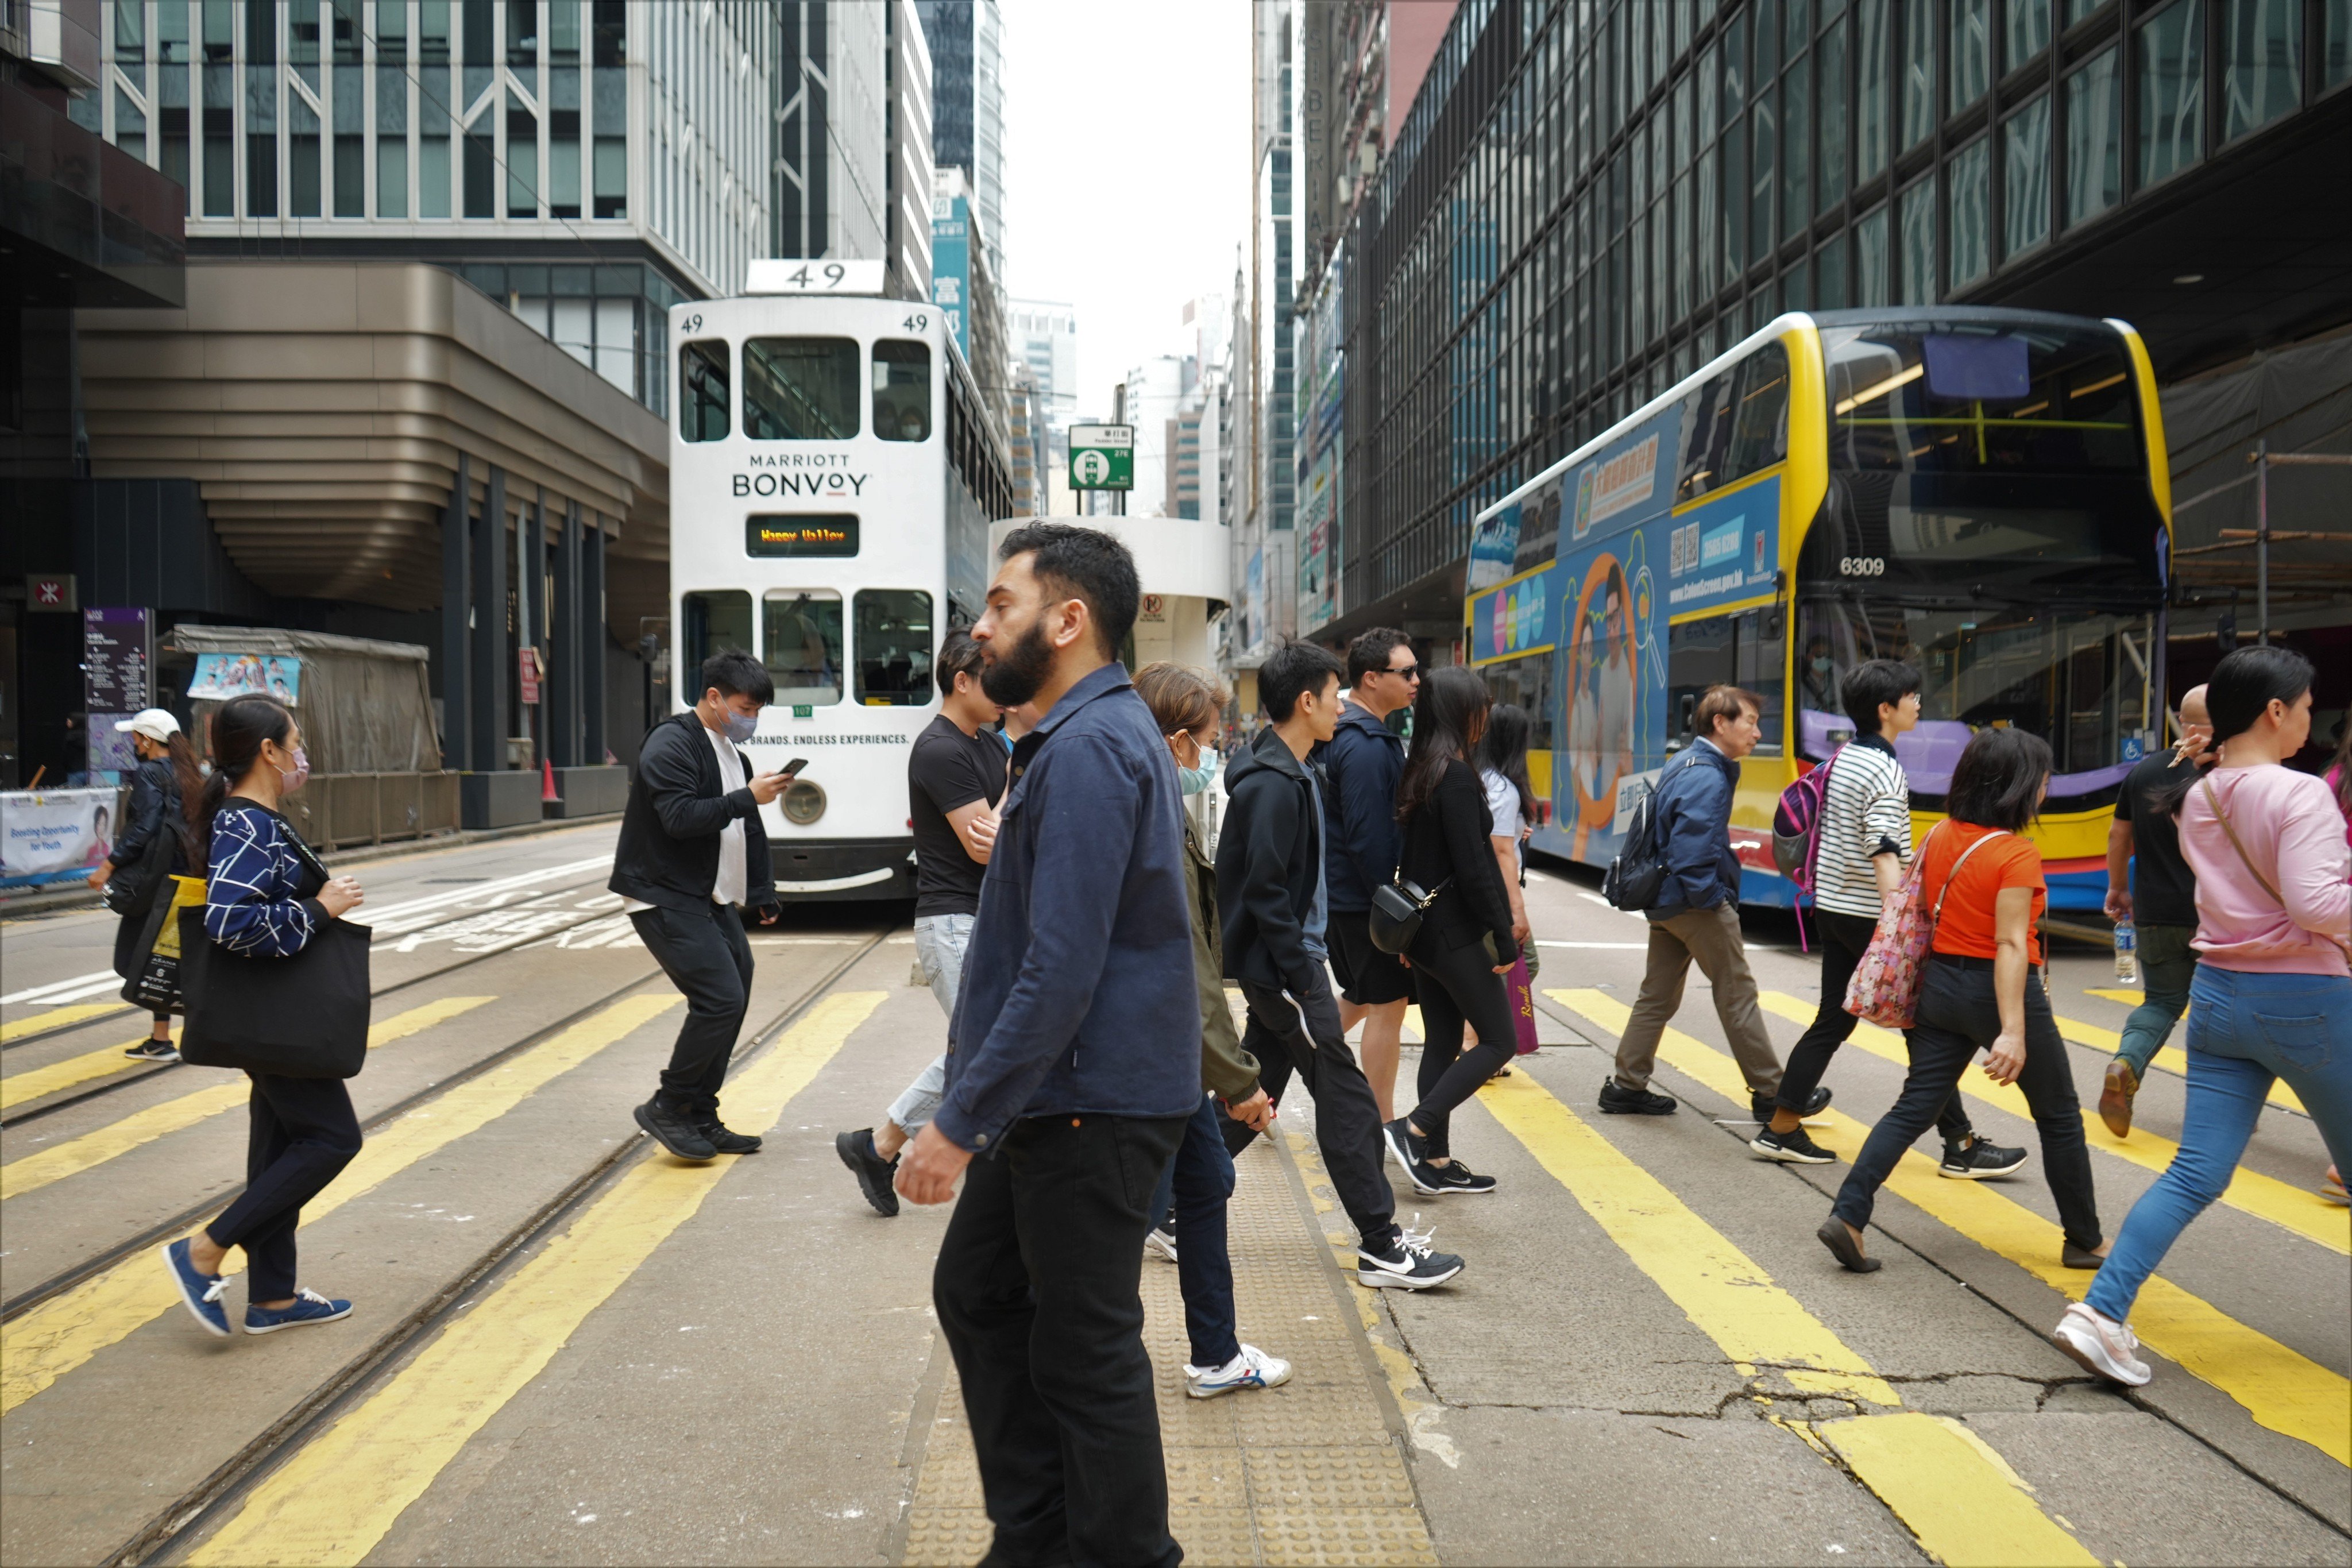 People cross a road in Central, Hong Kong. Is casual racism accepted as a small price to pay for a life in a city envied by much of Asia for its high standard of living? Photo: Shutterstock